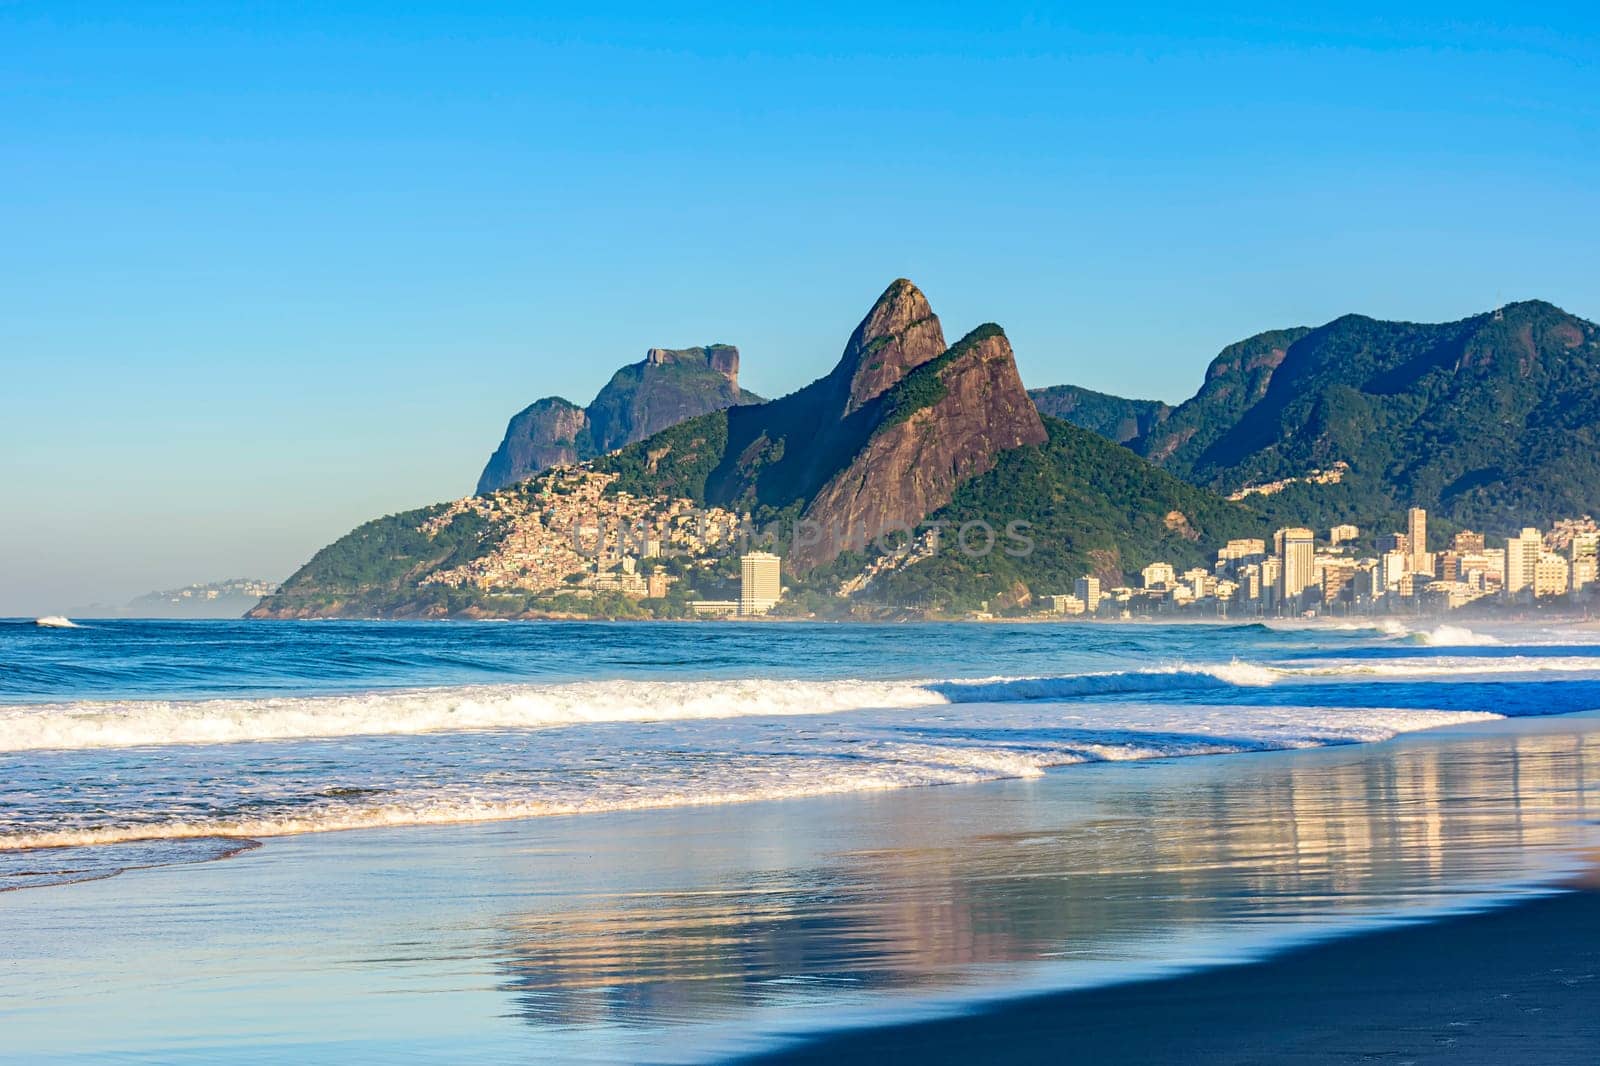 Dawn in the city of Rio de Janeiro with the empty Ipanema beach by Fred_Pinheiro